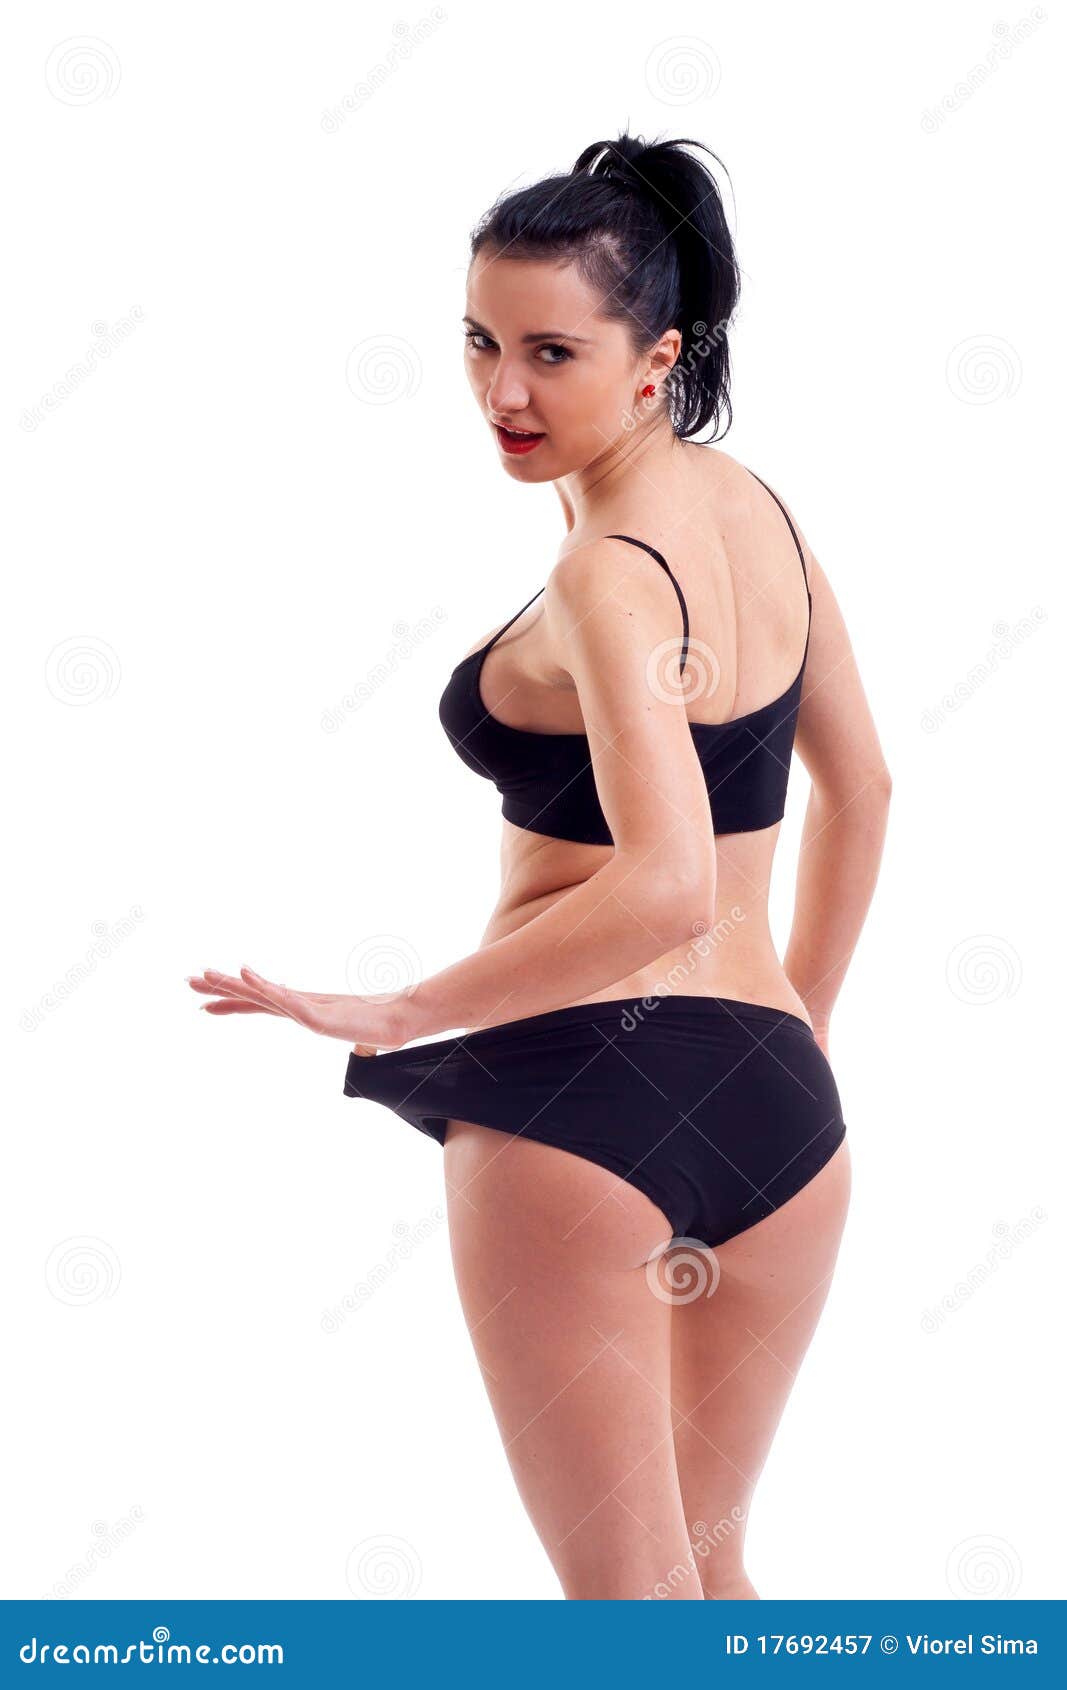 Woman Pulling Her Underwear Stock Image - Image of lady, beauty: 17692457